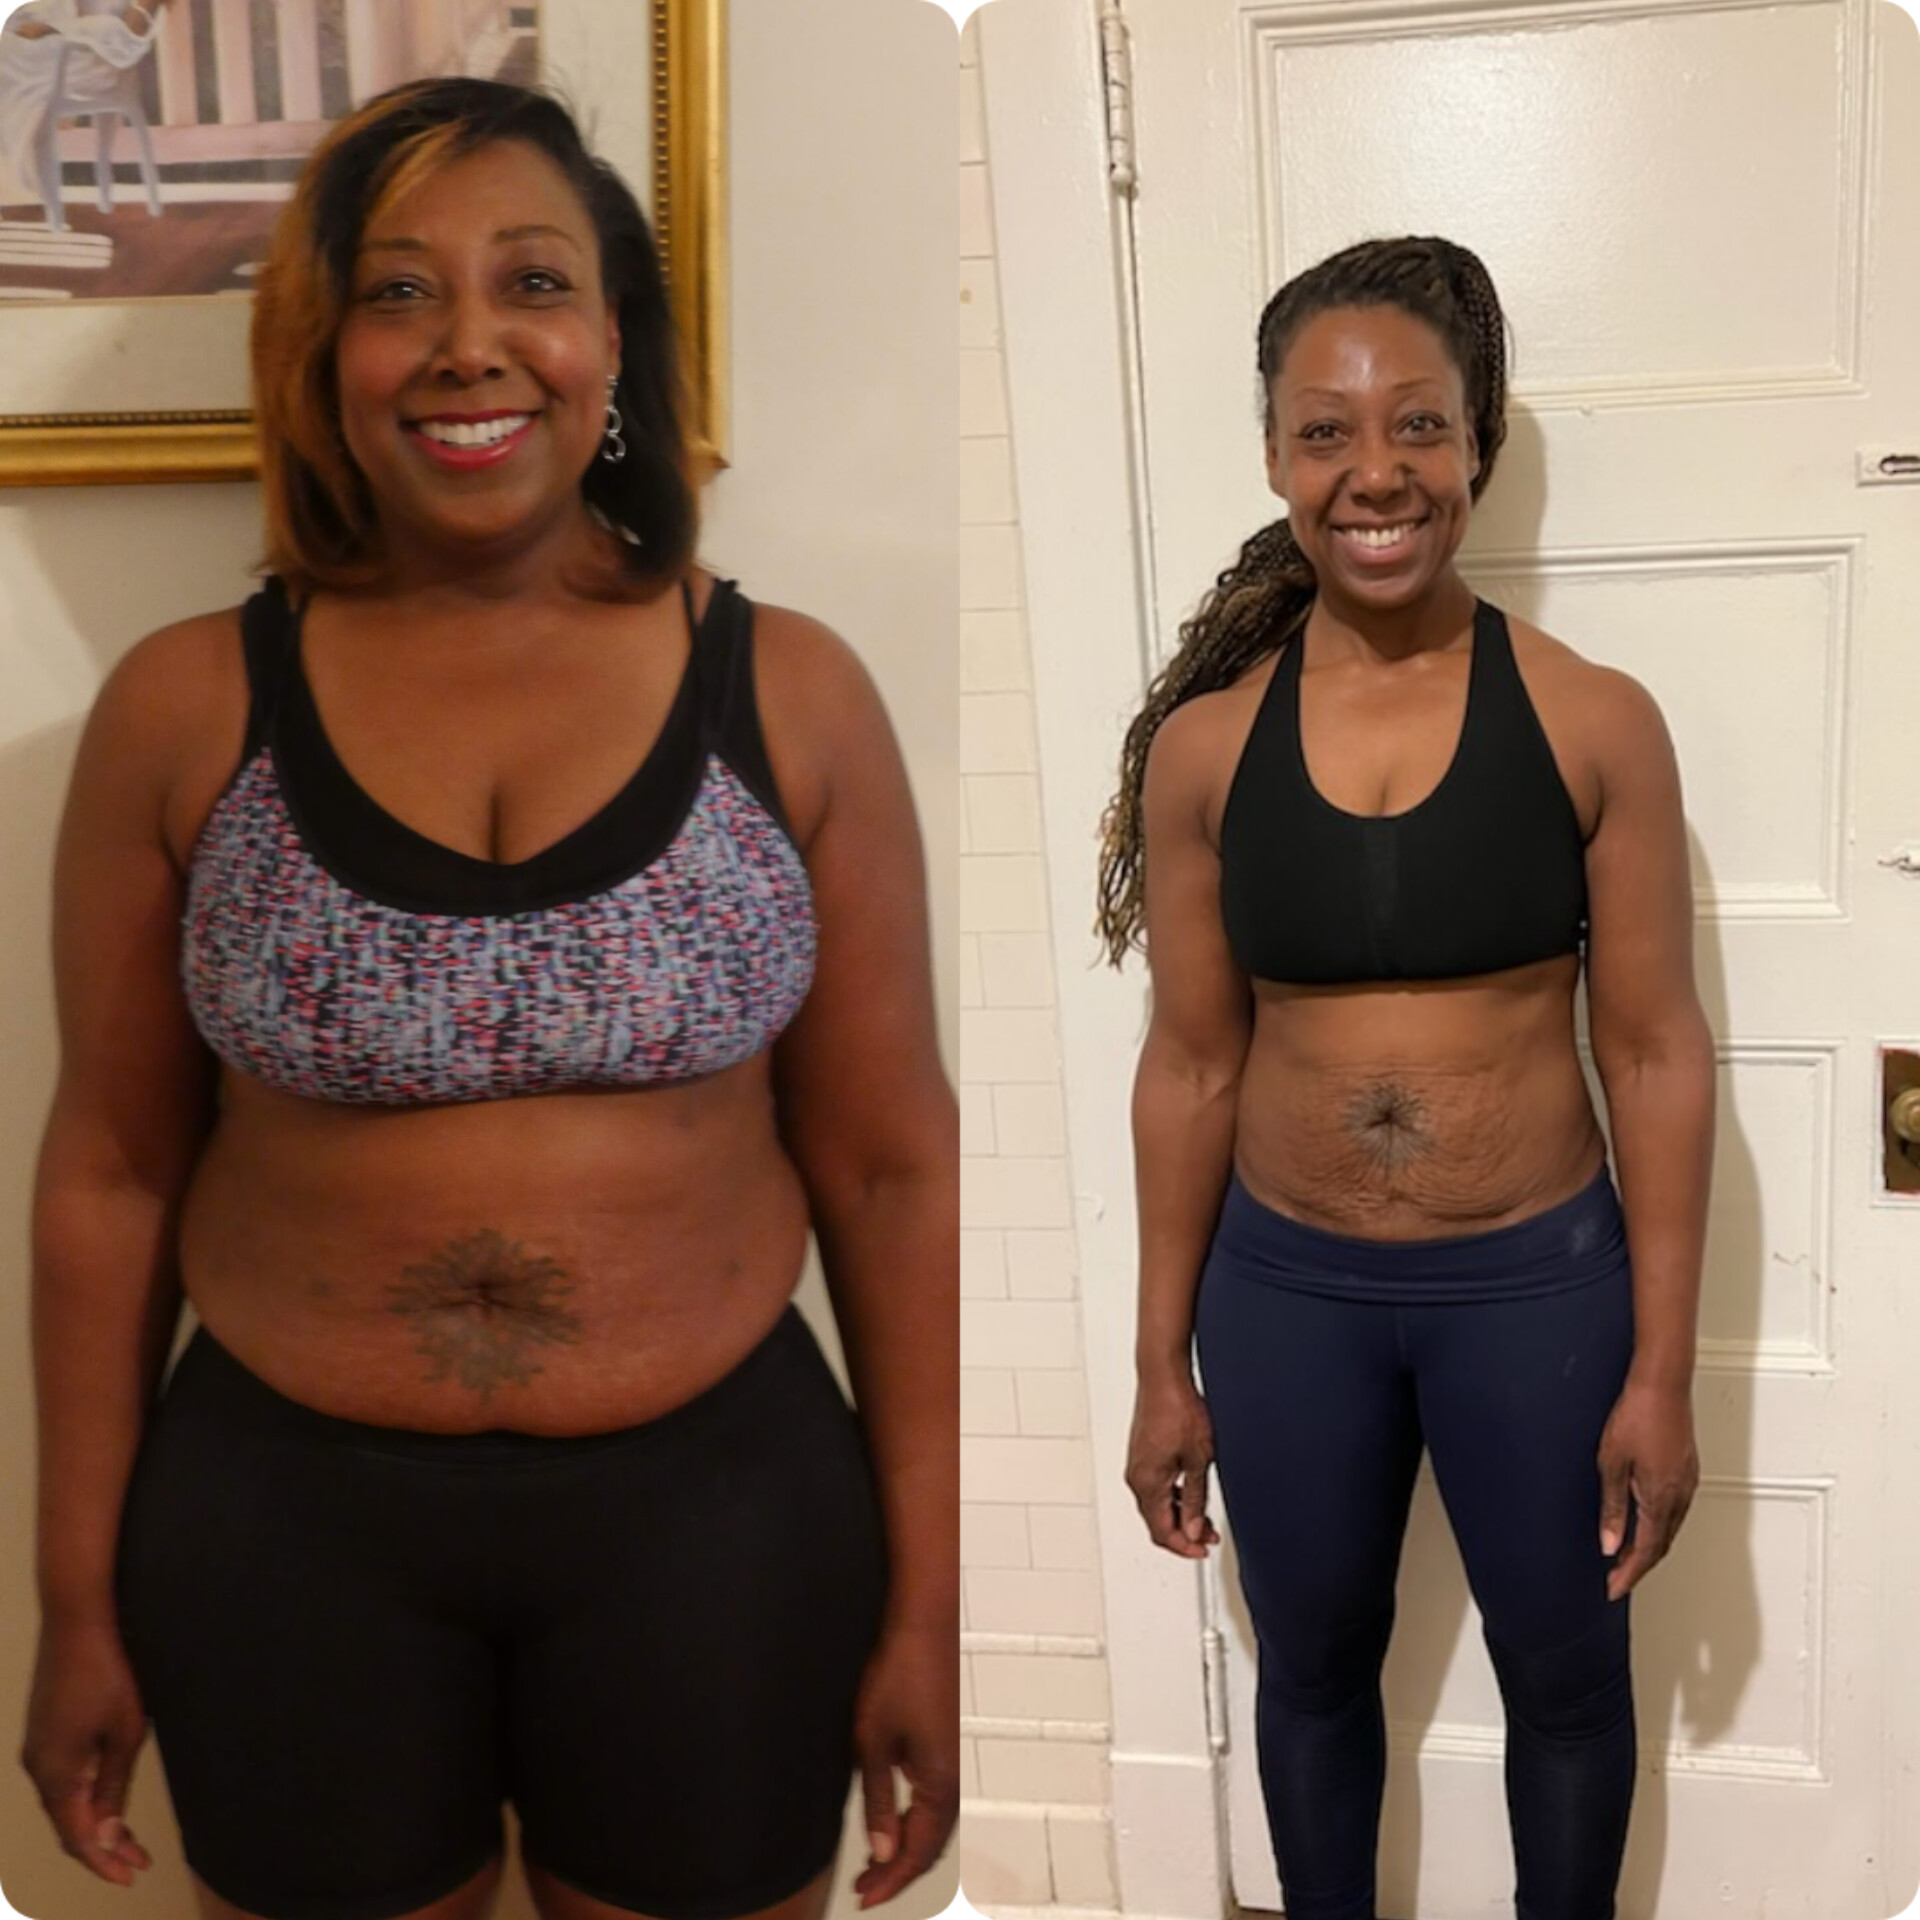 The Lifestyler Program: Anna’s Amazing Transformation and Your Chance to Join!